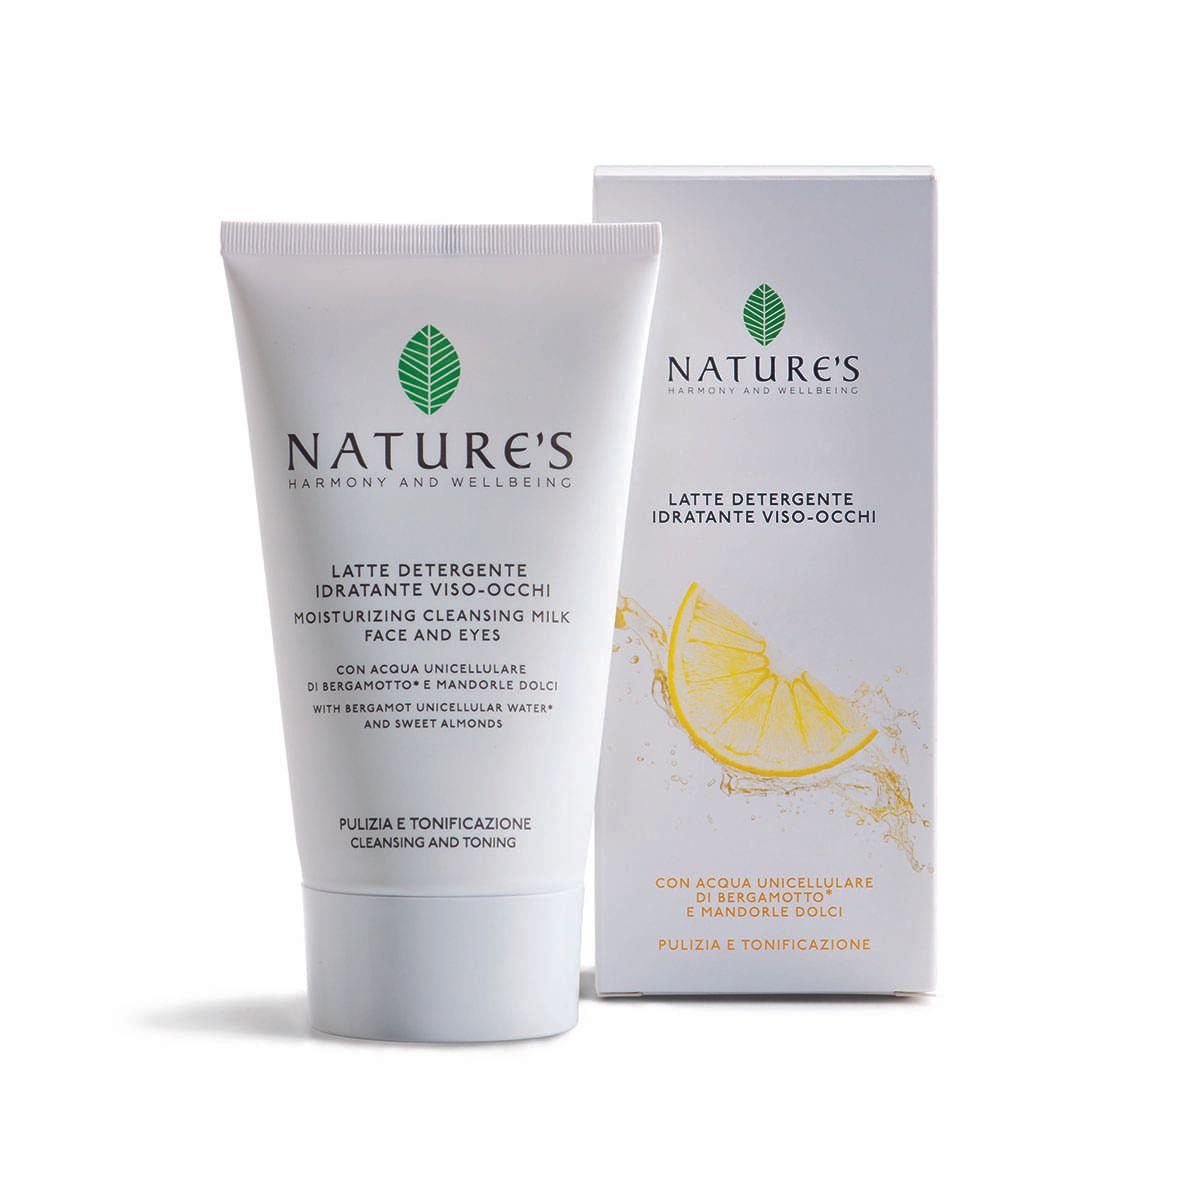 NATURES MOISTURIZING CLEANSING MILK FACE AND EYES